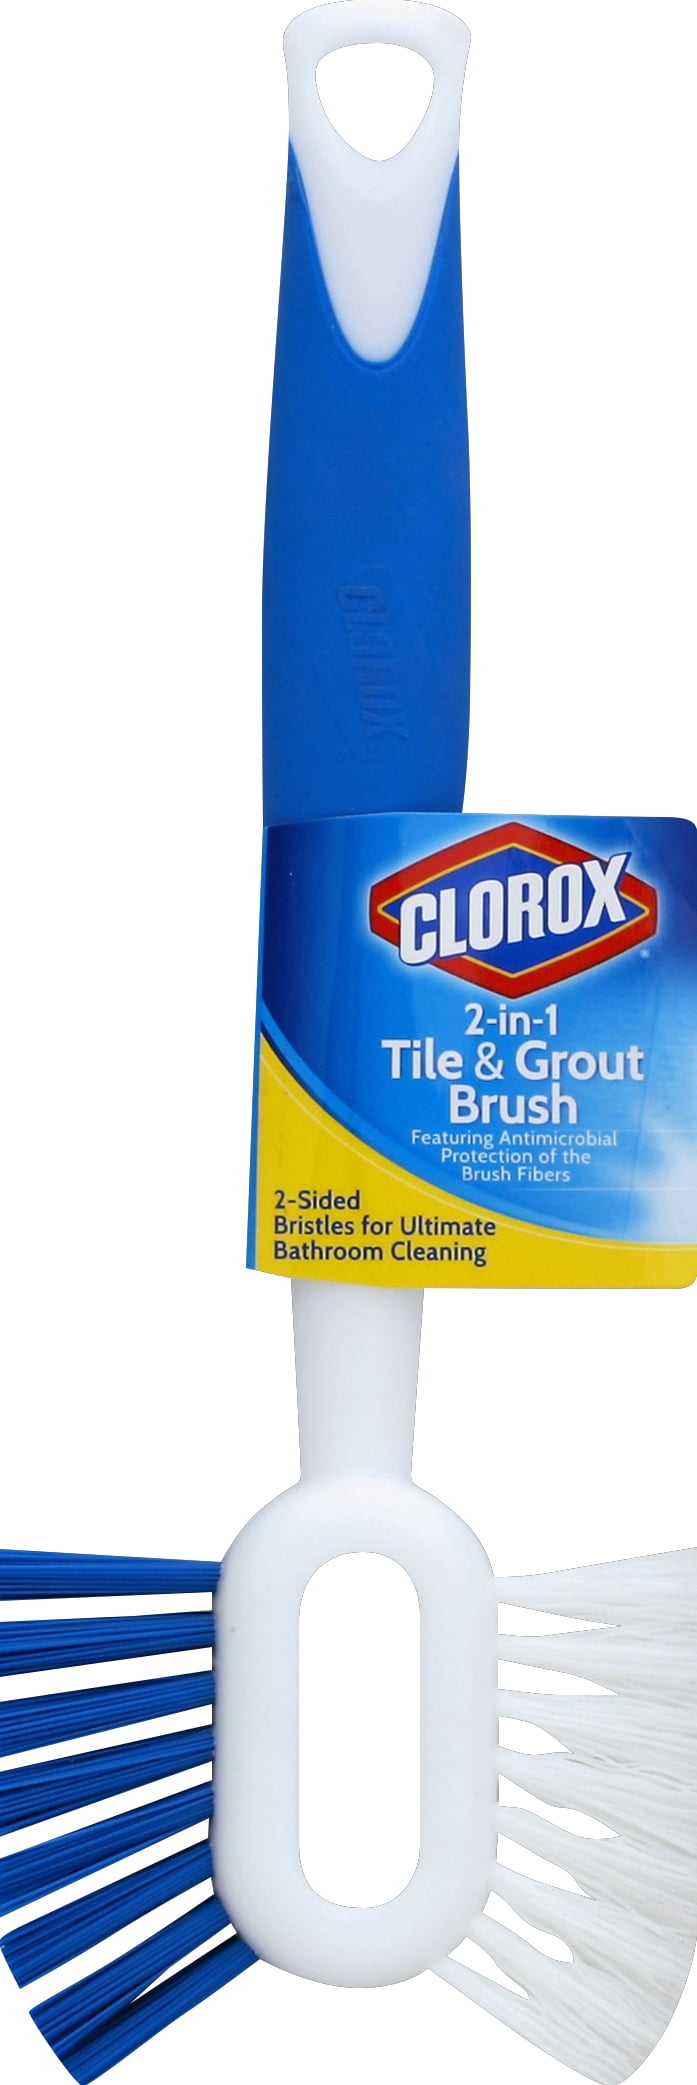 Clorox 2 In 1 Tile Grout Brush, Clorox Tub And Tile Scrubber